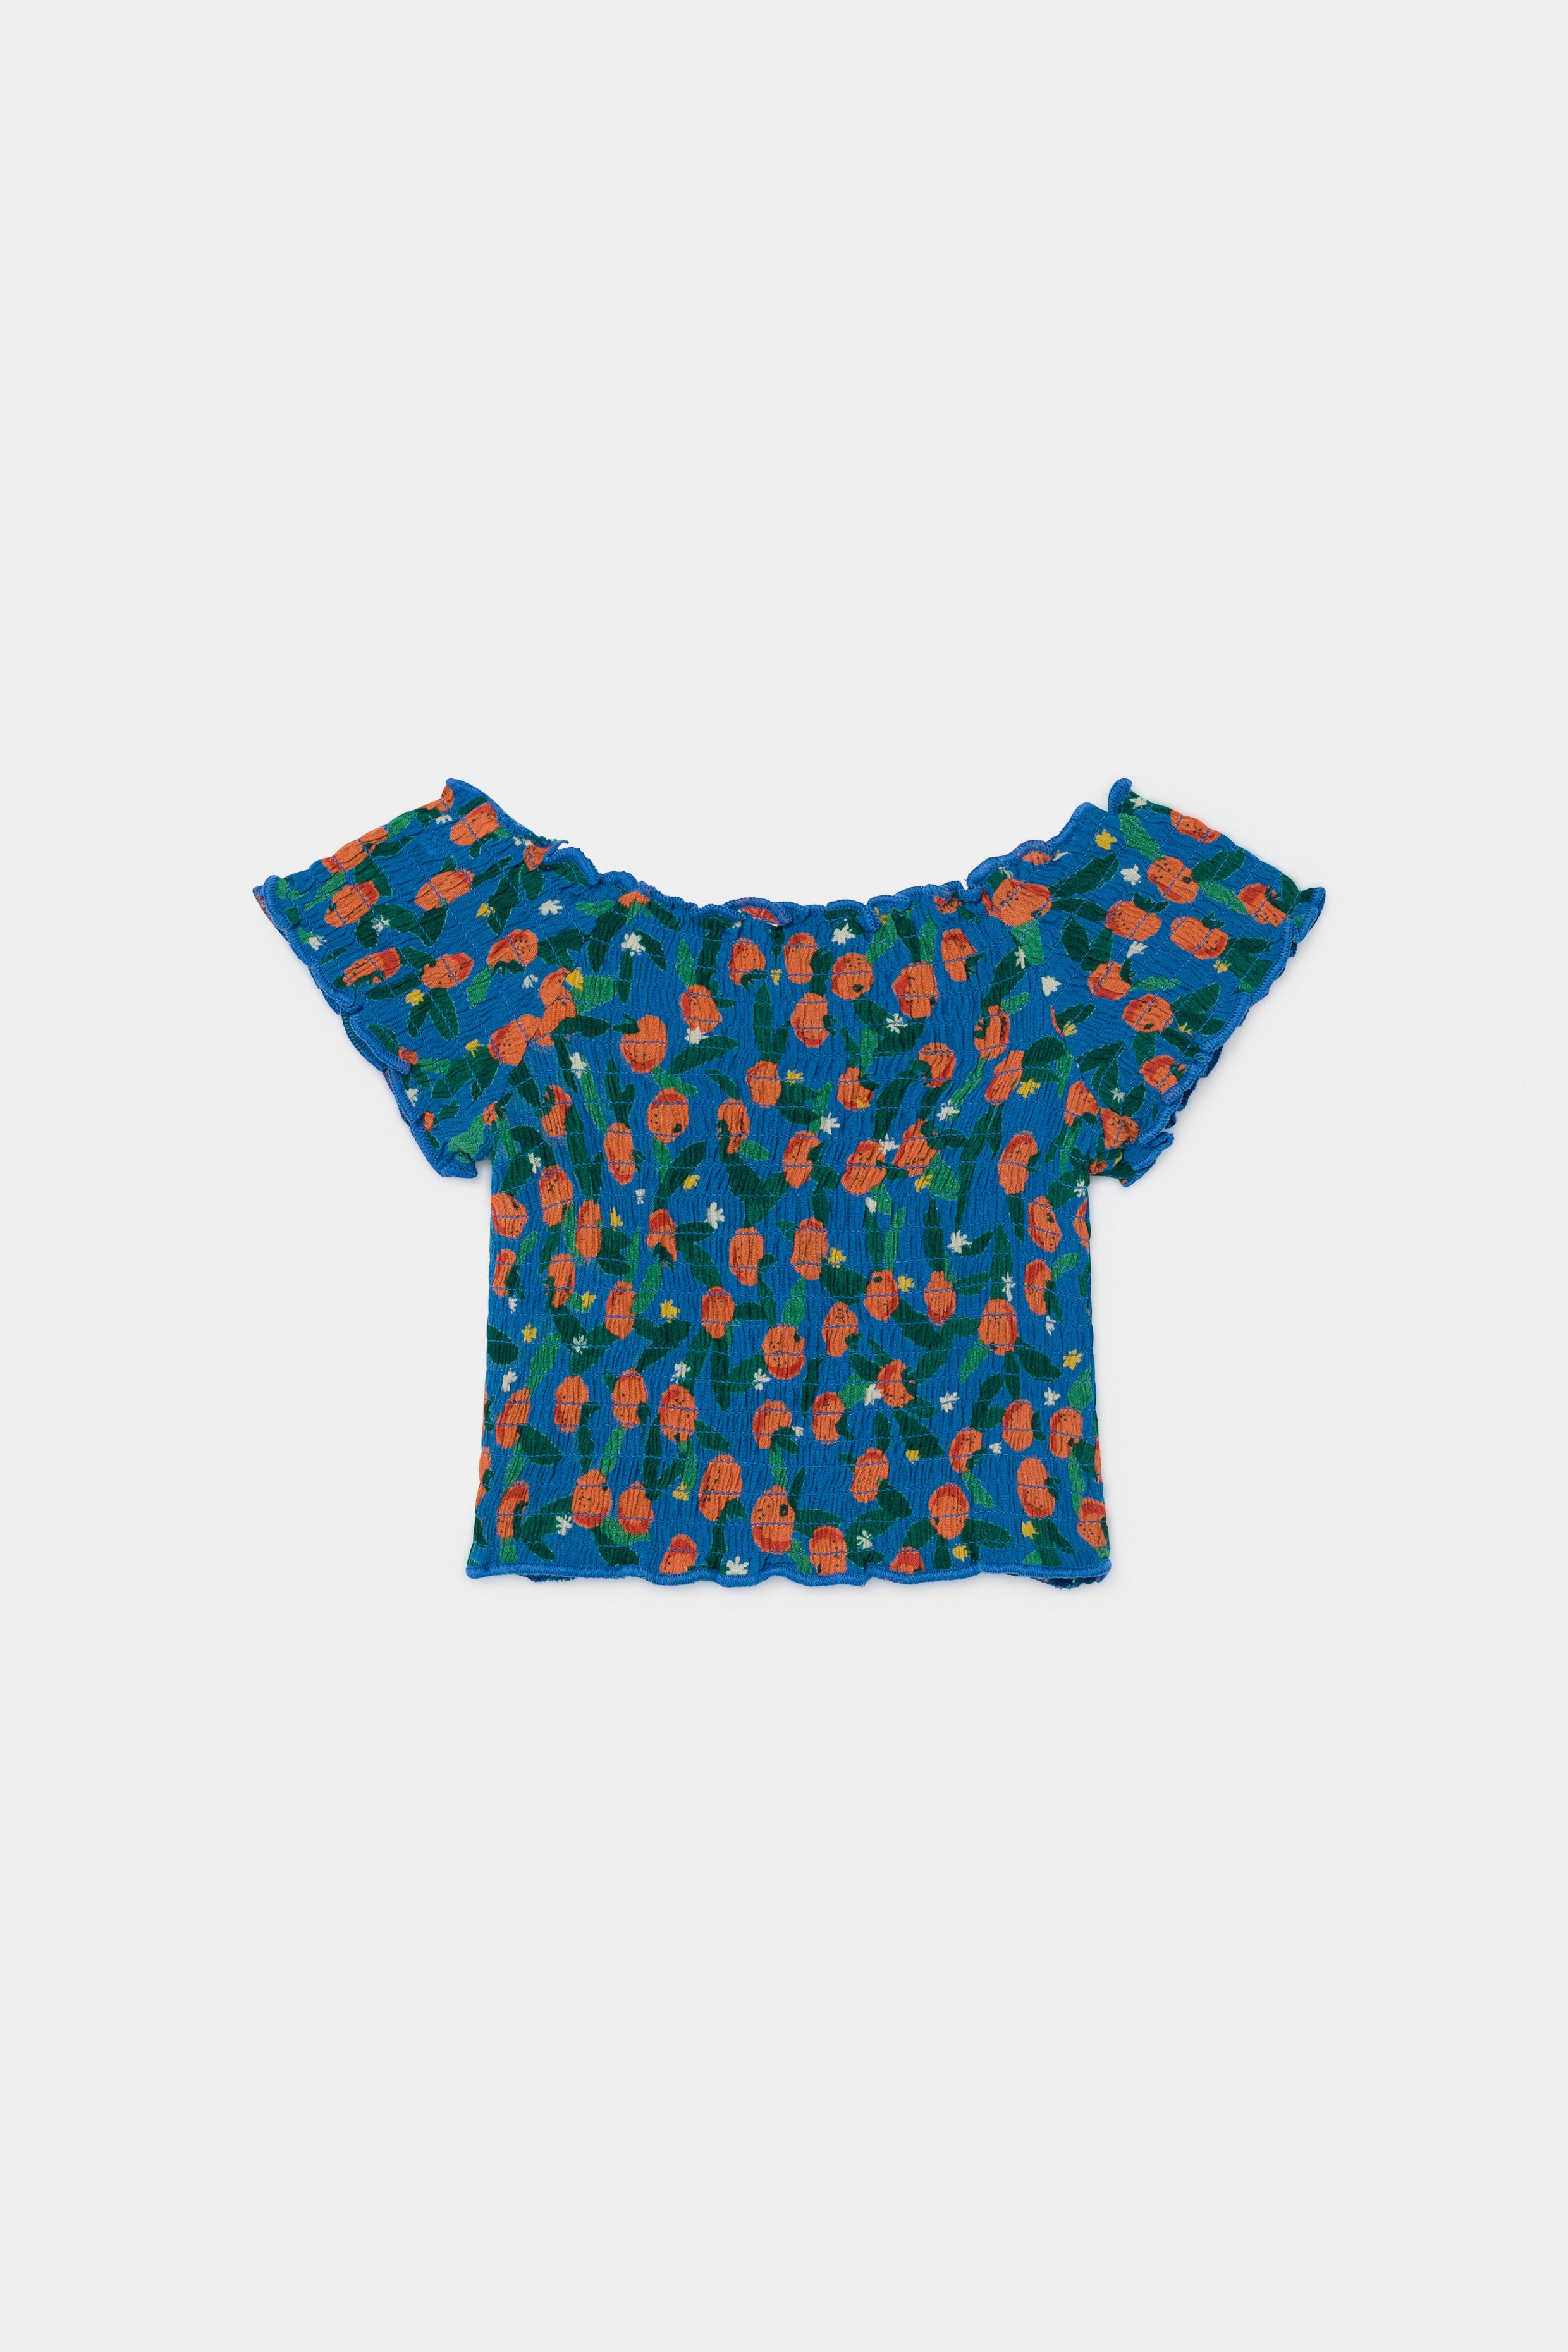 Bobo Choses All Over Oranges Smocked top